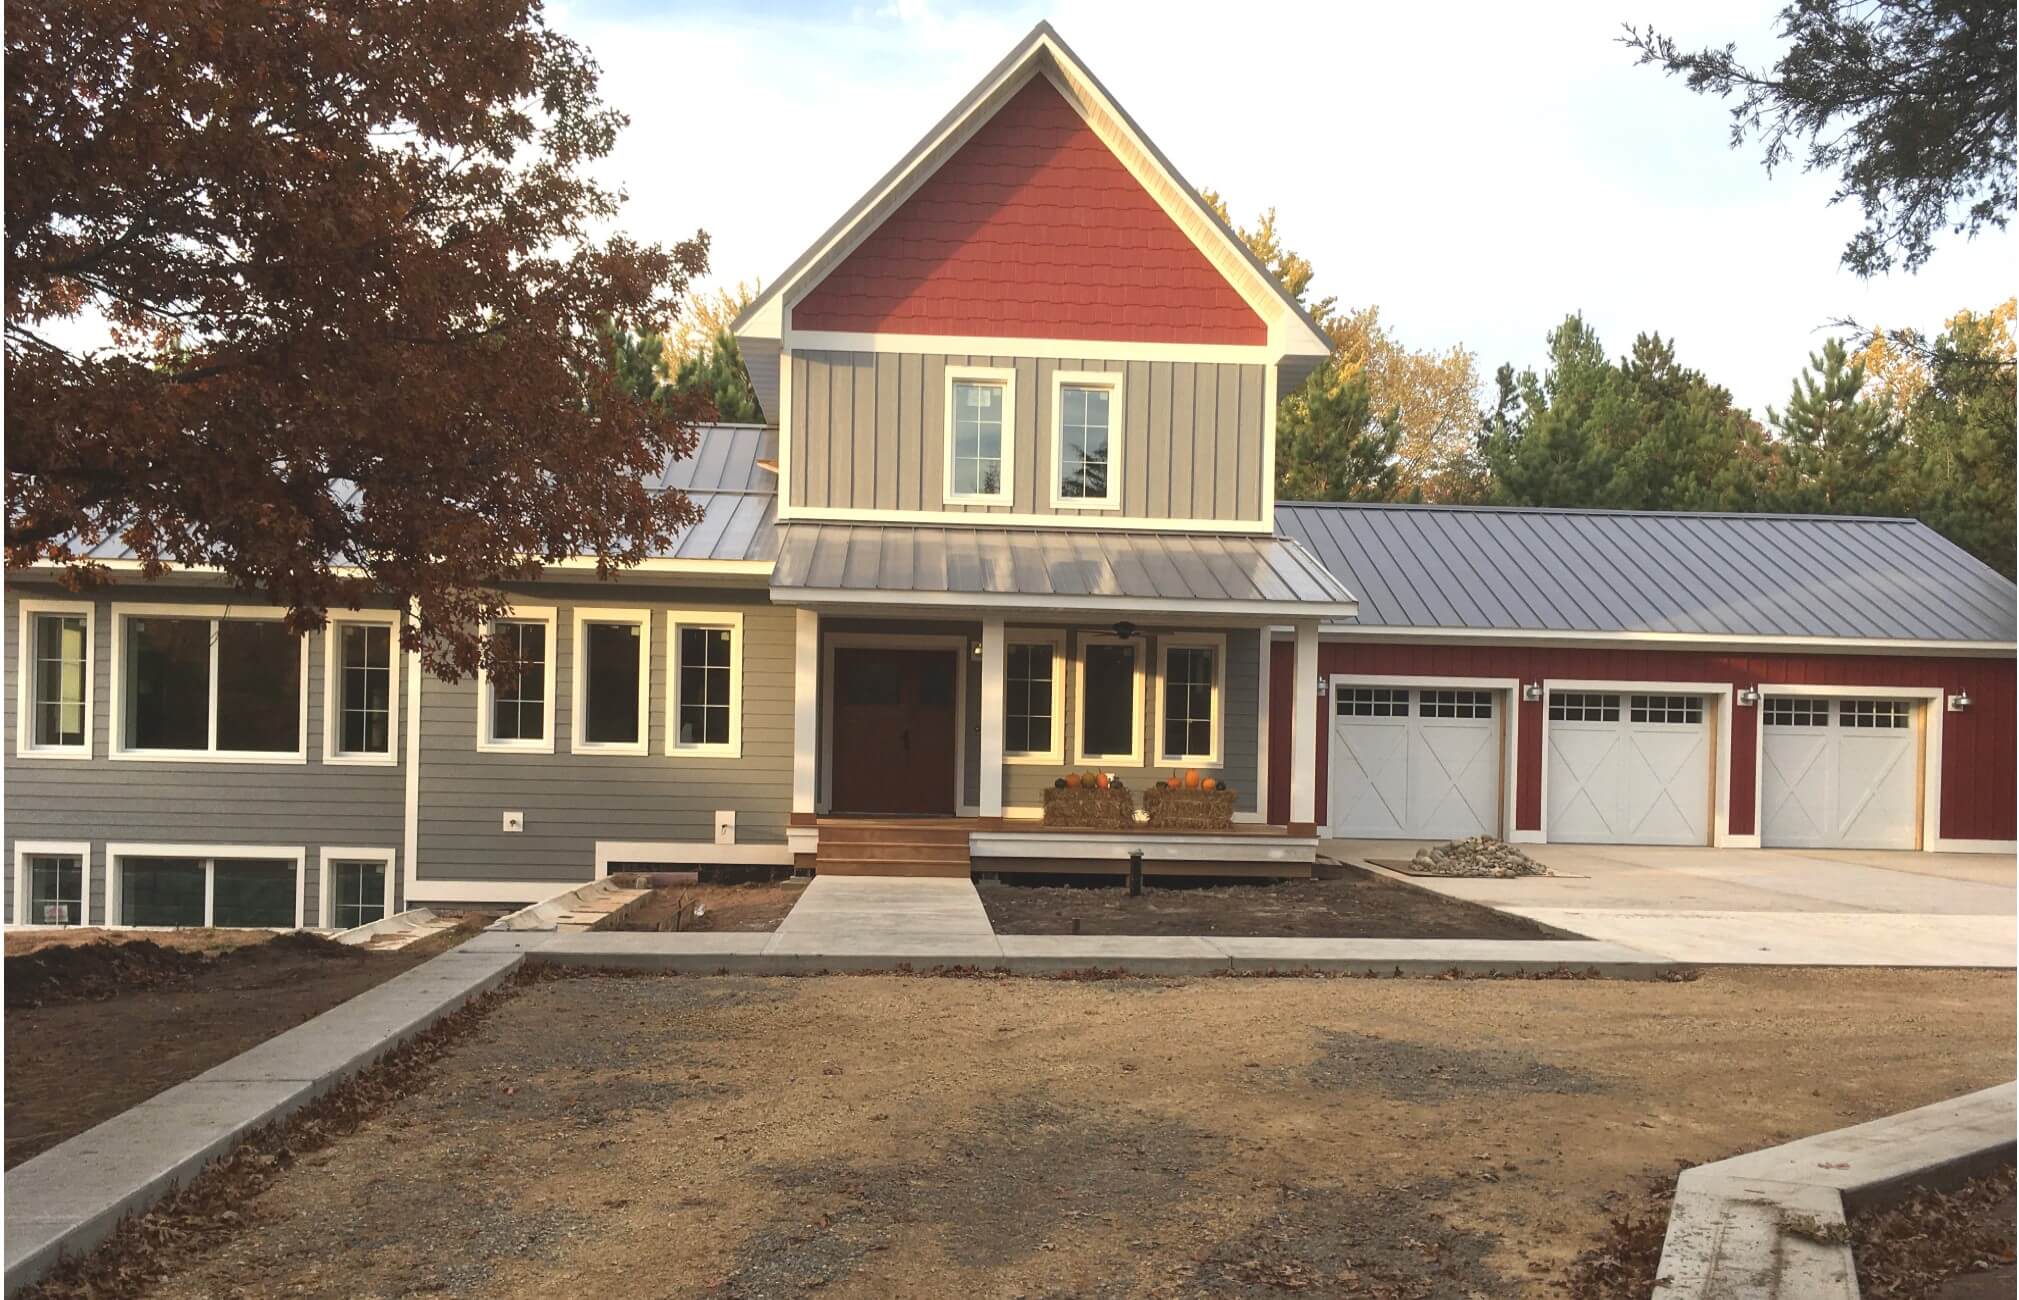 2019 Logix ICF Award 1st Runner Up - Large Residential | This home achieved a blower door test rating of .39 ACH/HR (12x better that prevailing local codes) and was awarded an incredible HERS Rating of 9. This home was sized for a 30,000 BTU system which is 1/5 of the typical requirement for a home of this size.